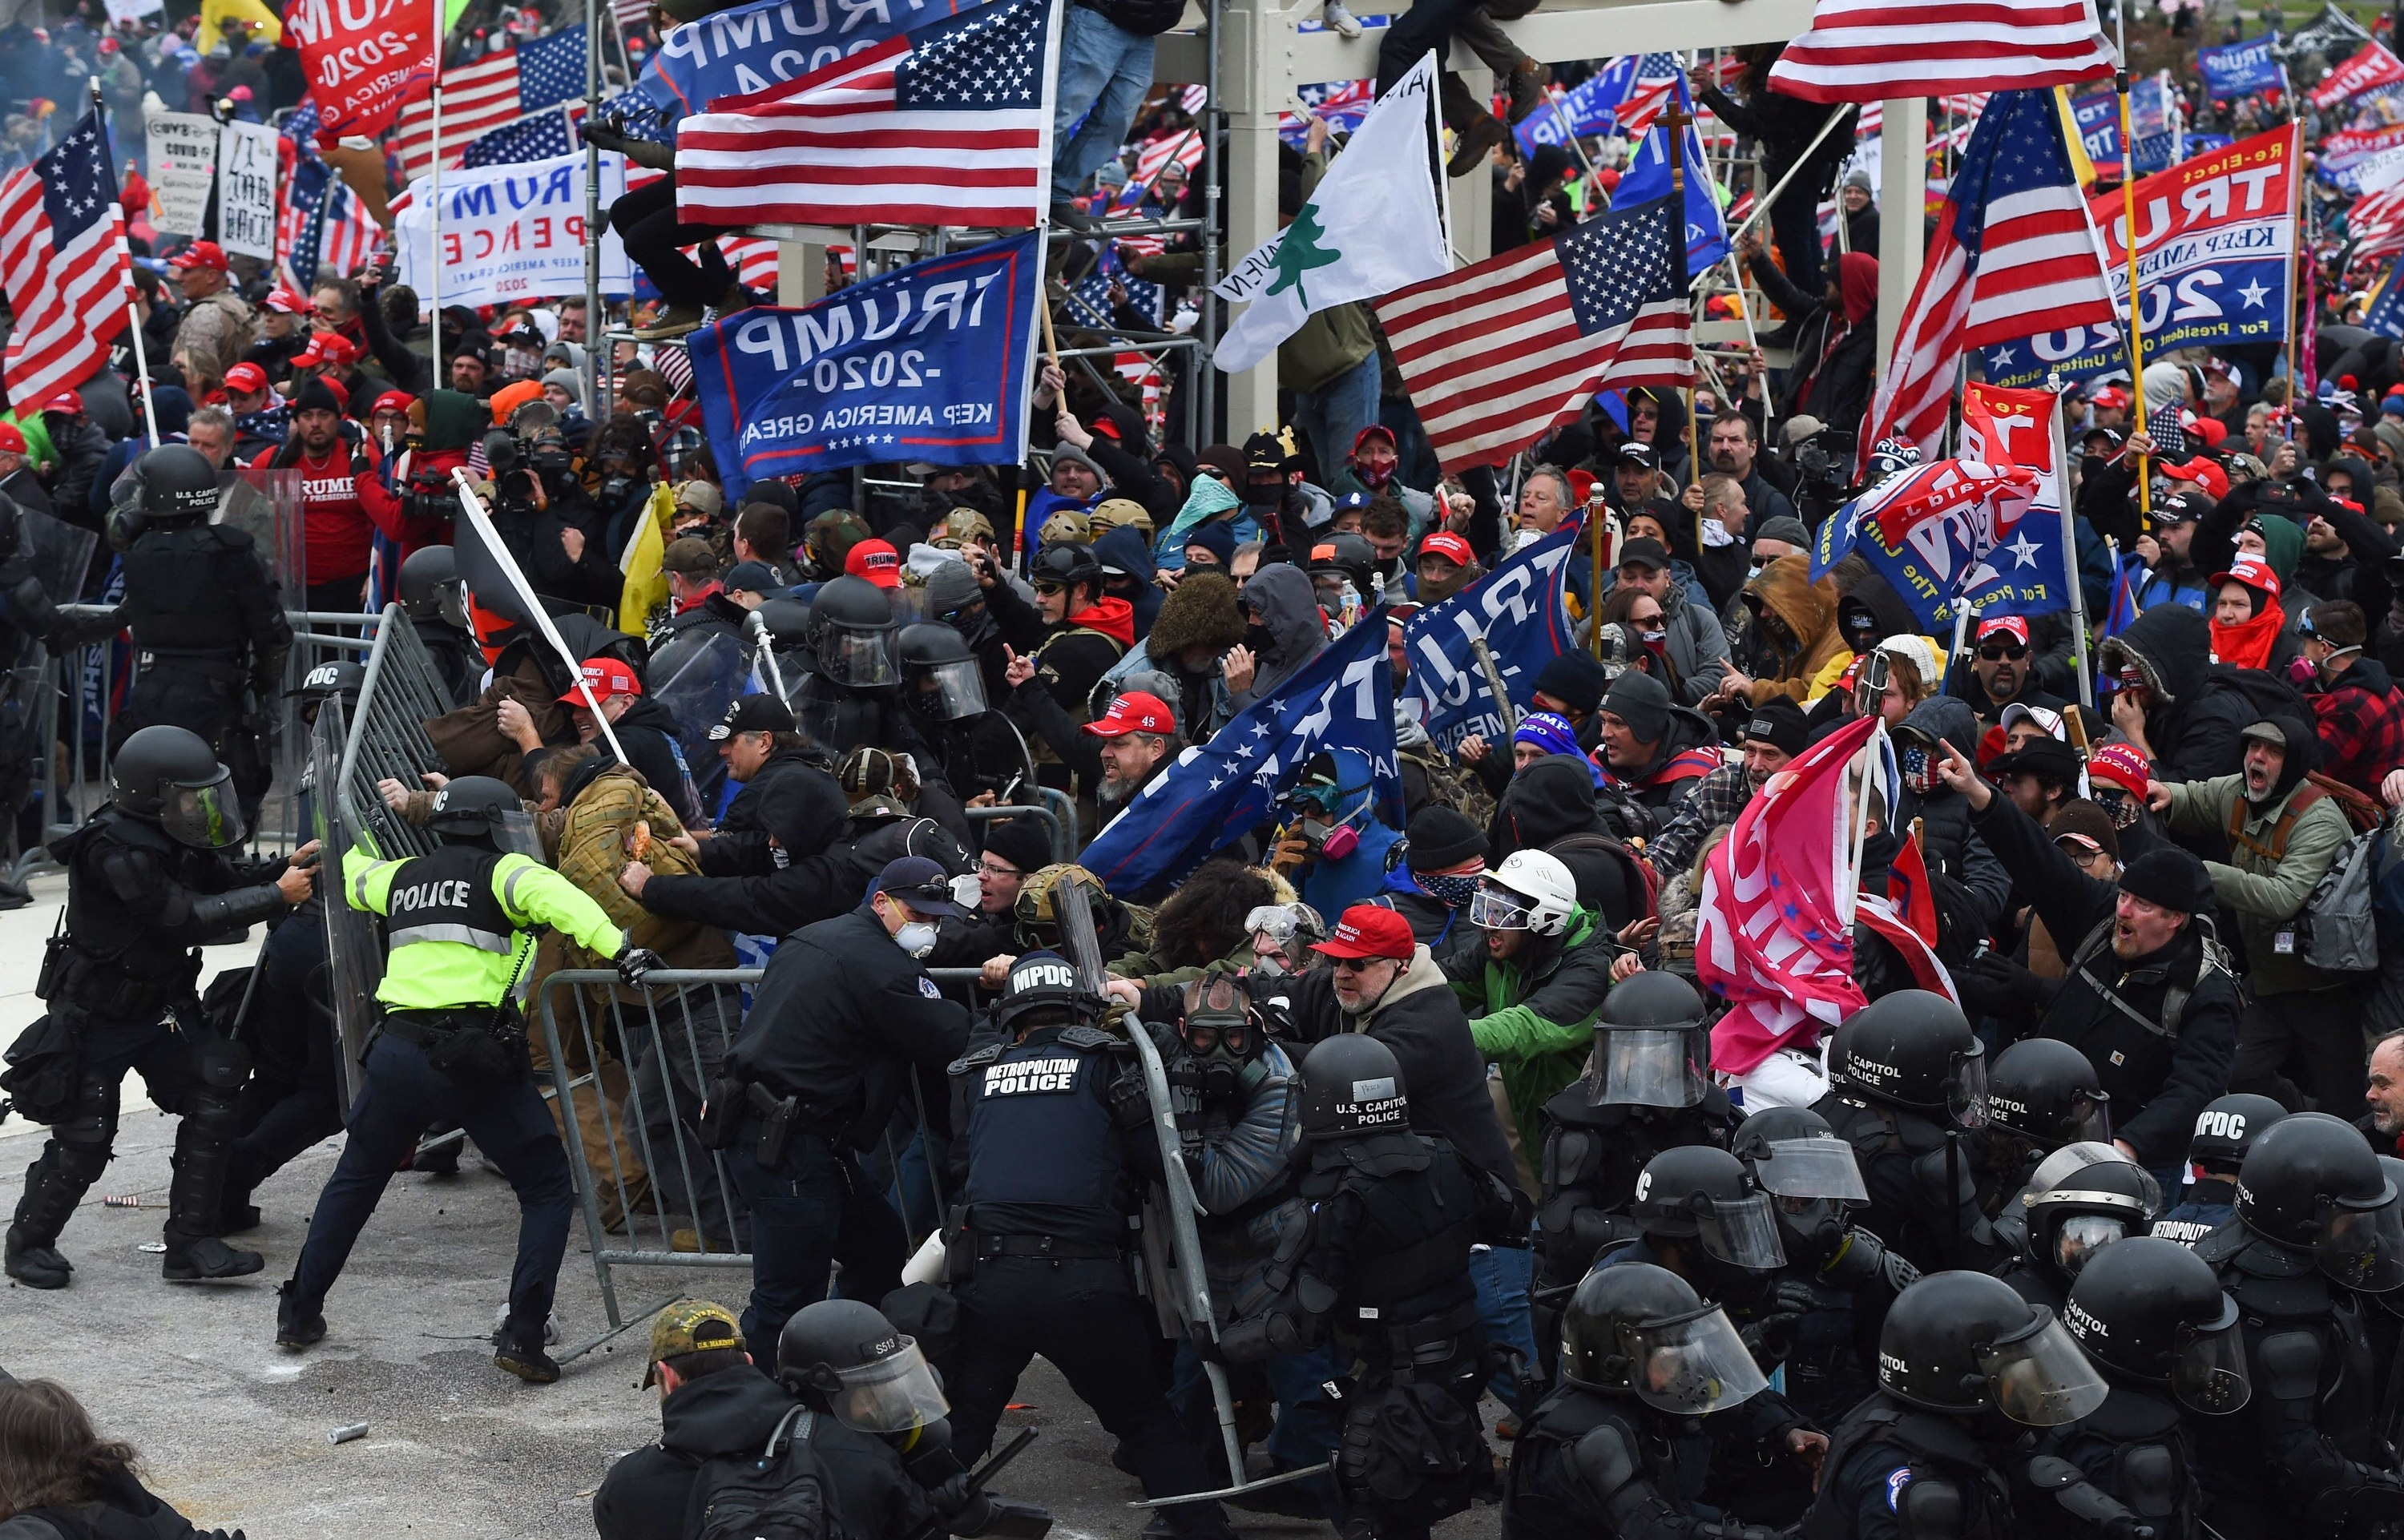 A crowd of Trump supporters clash with police and security forces as they push barricades to storm the US Capitol in Washington D.C on January 6, 2021. - Demonstrators breeched security and entered the Capitol